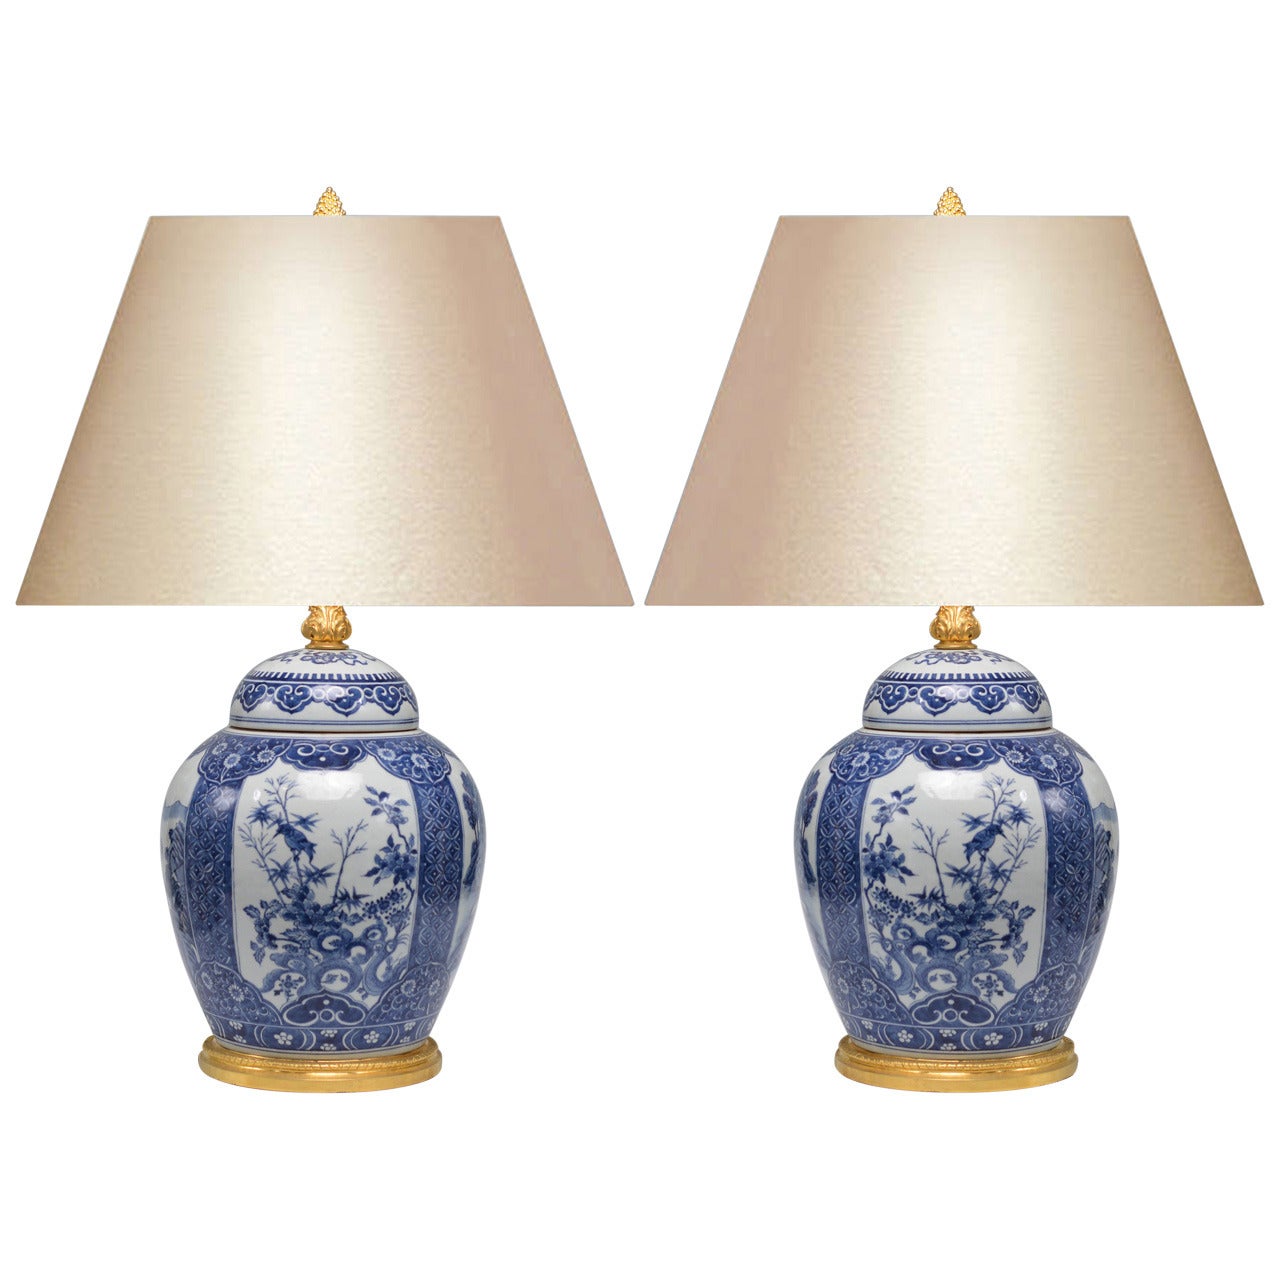 Pair of Blue and White Porcelain Lamps